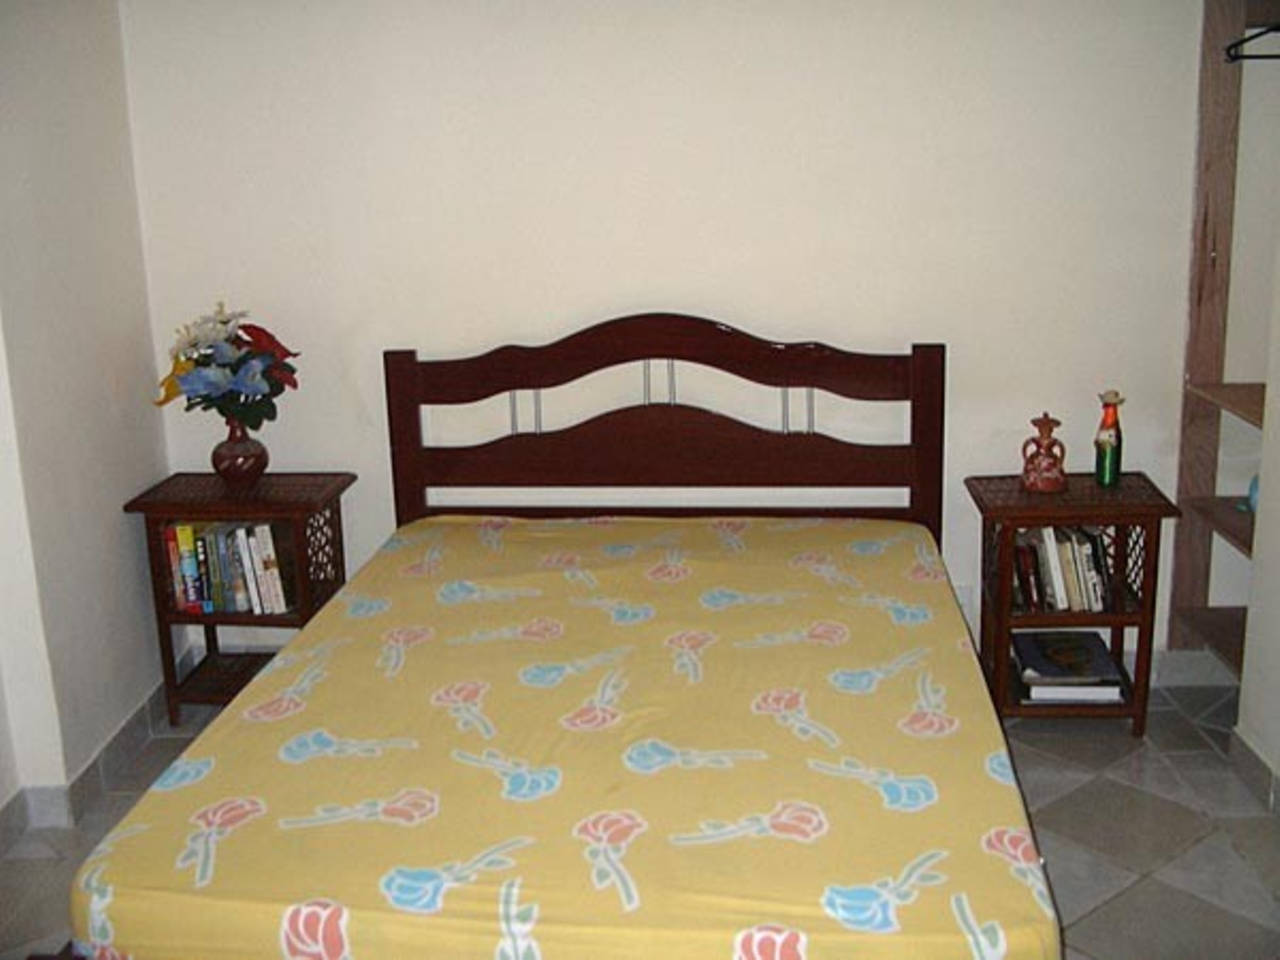 Rooms for rent near me  Rooms for rent, Affordable rooms, Rent